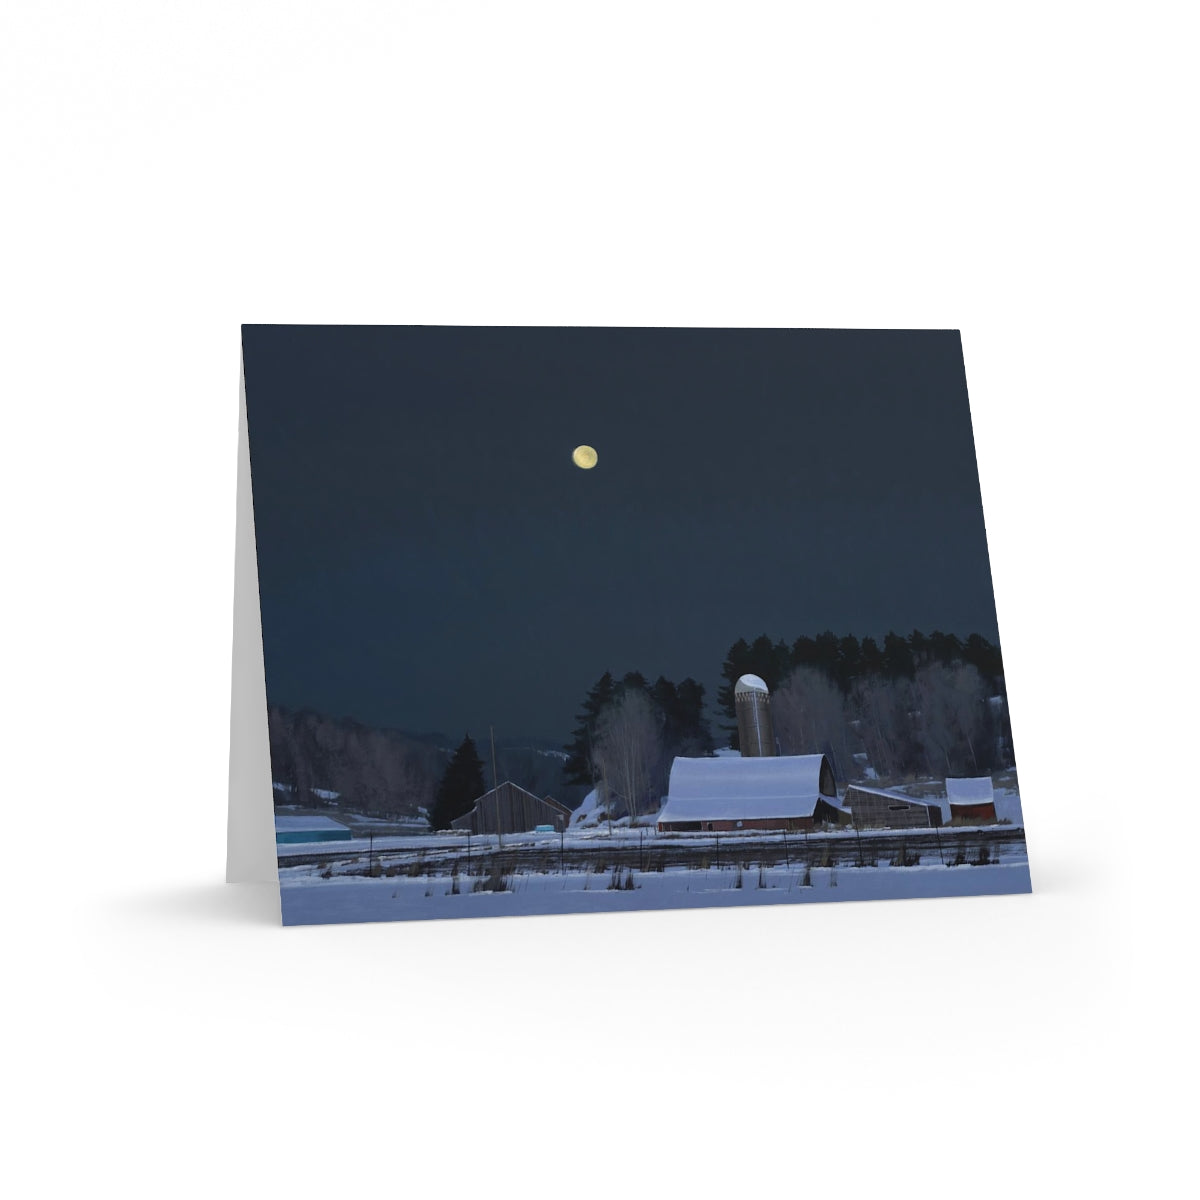 Ben Bauer: "Moonset 7 Minutes to Sun Up" Greeting cards (8, 16, and 24 pcs)